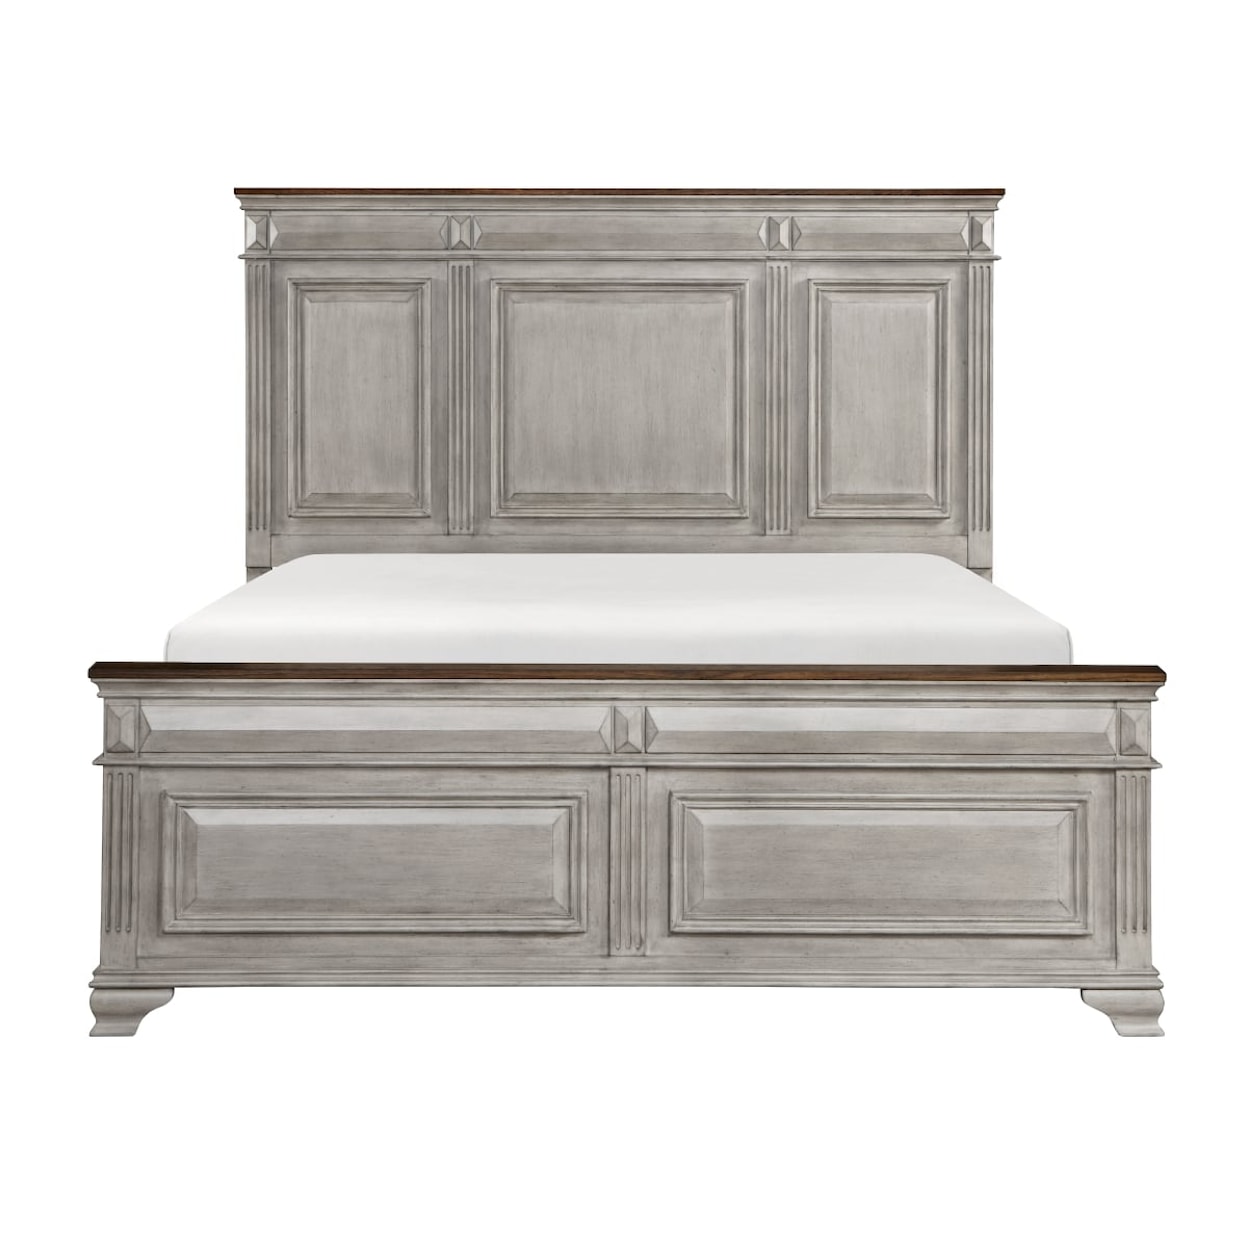 Homelegance Furniture Marquette Queen Bed